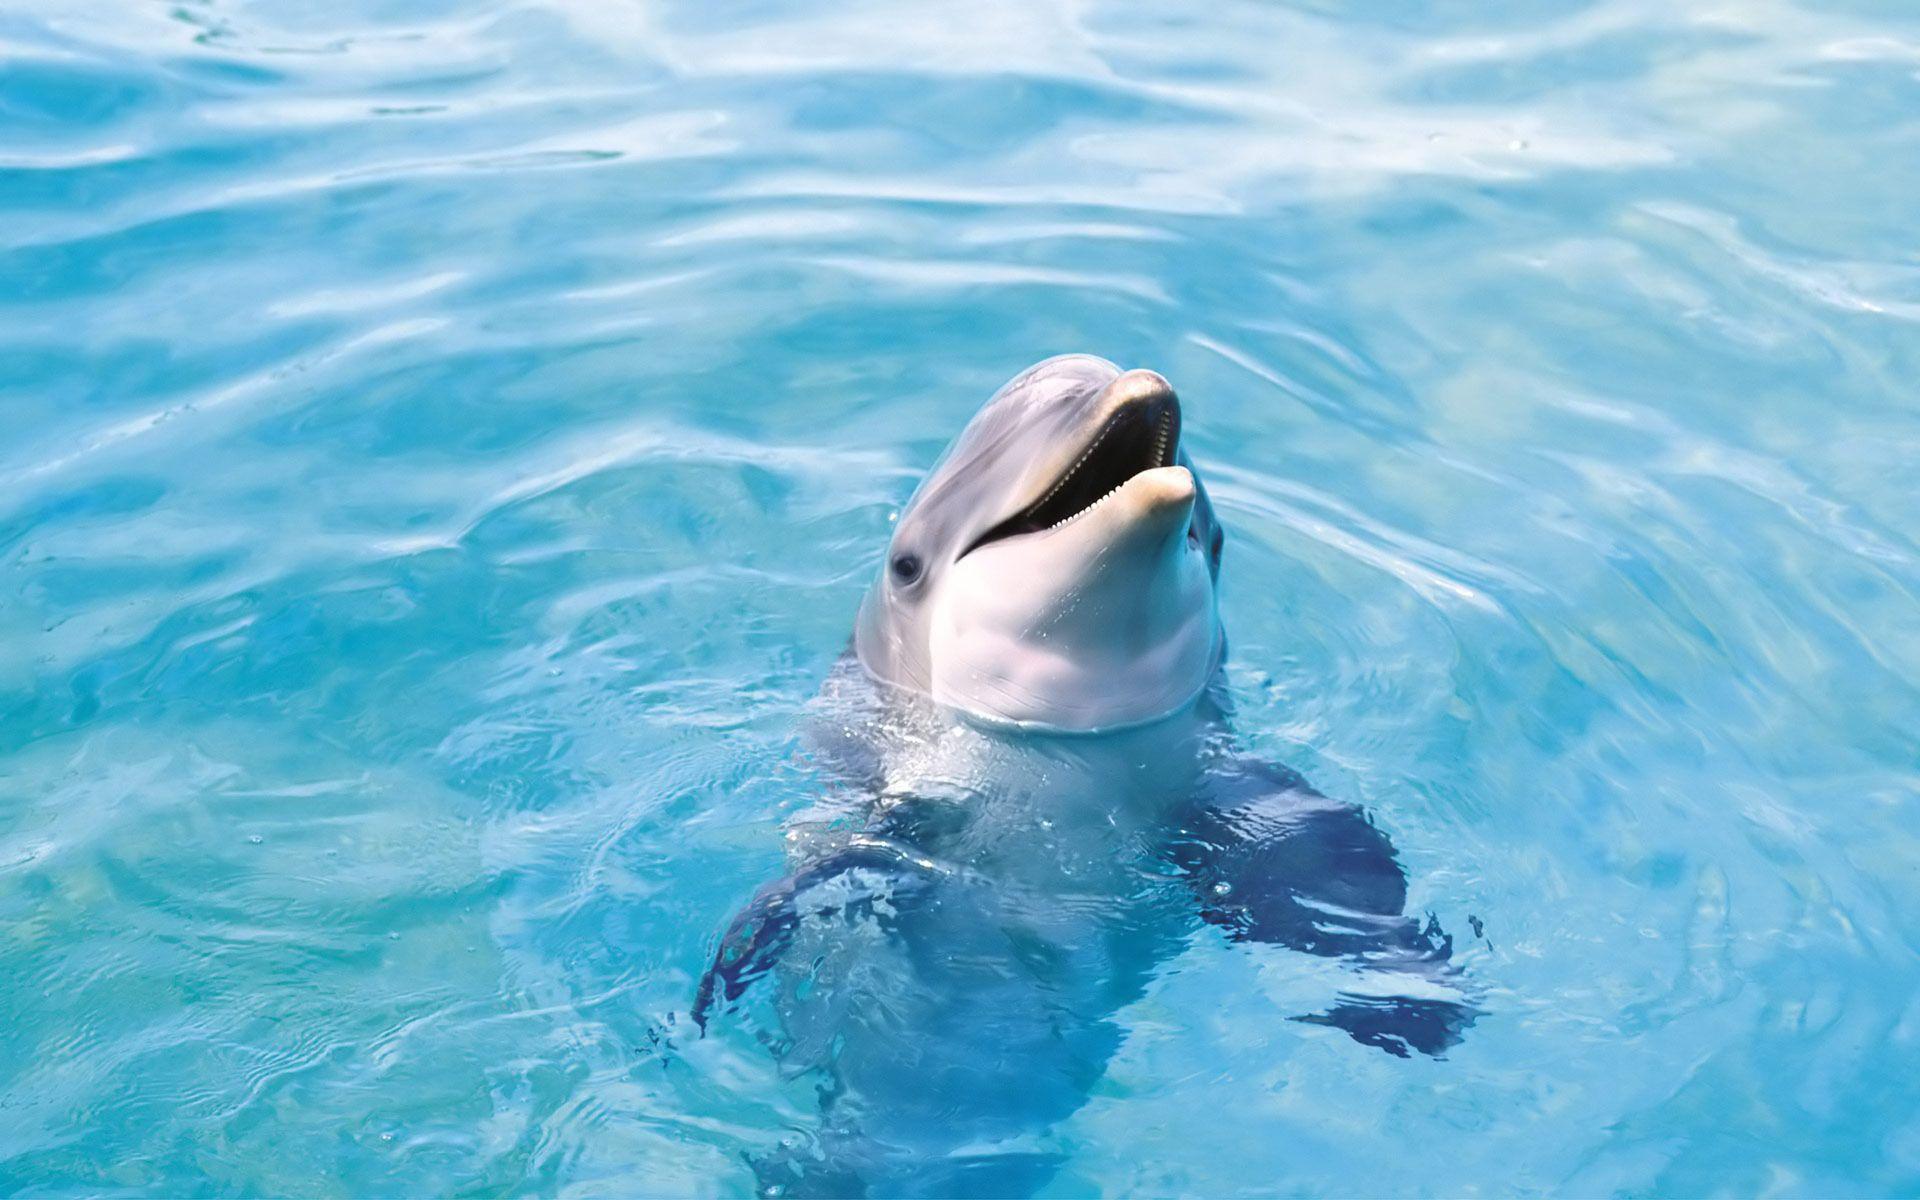 Free Dolphin Image 154382 High Definition Wallpaper. Suwall